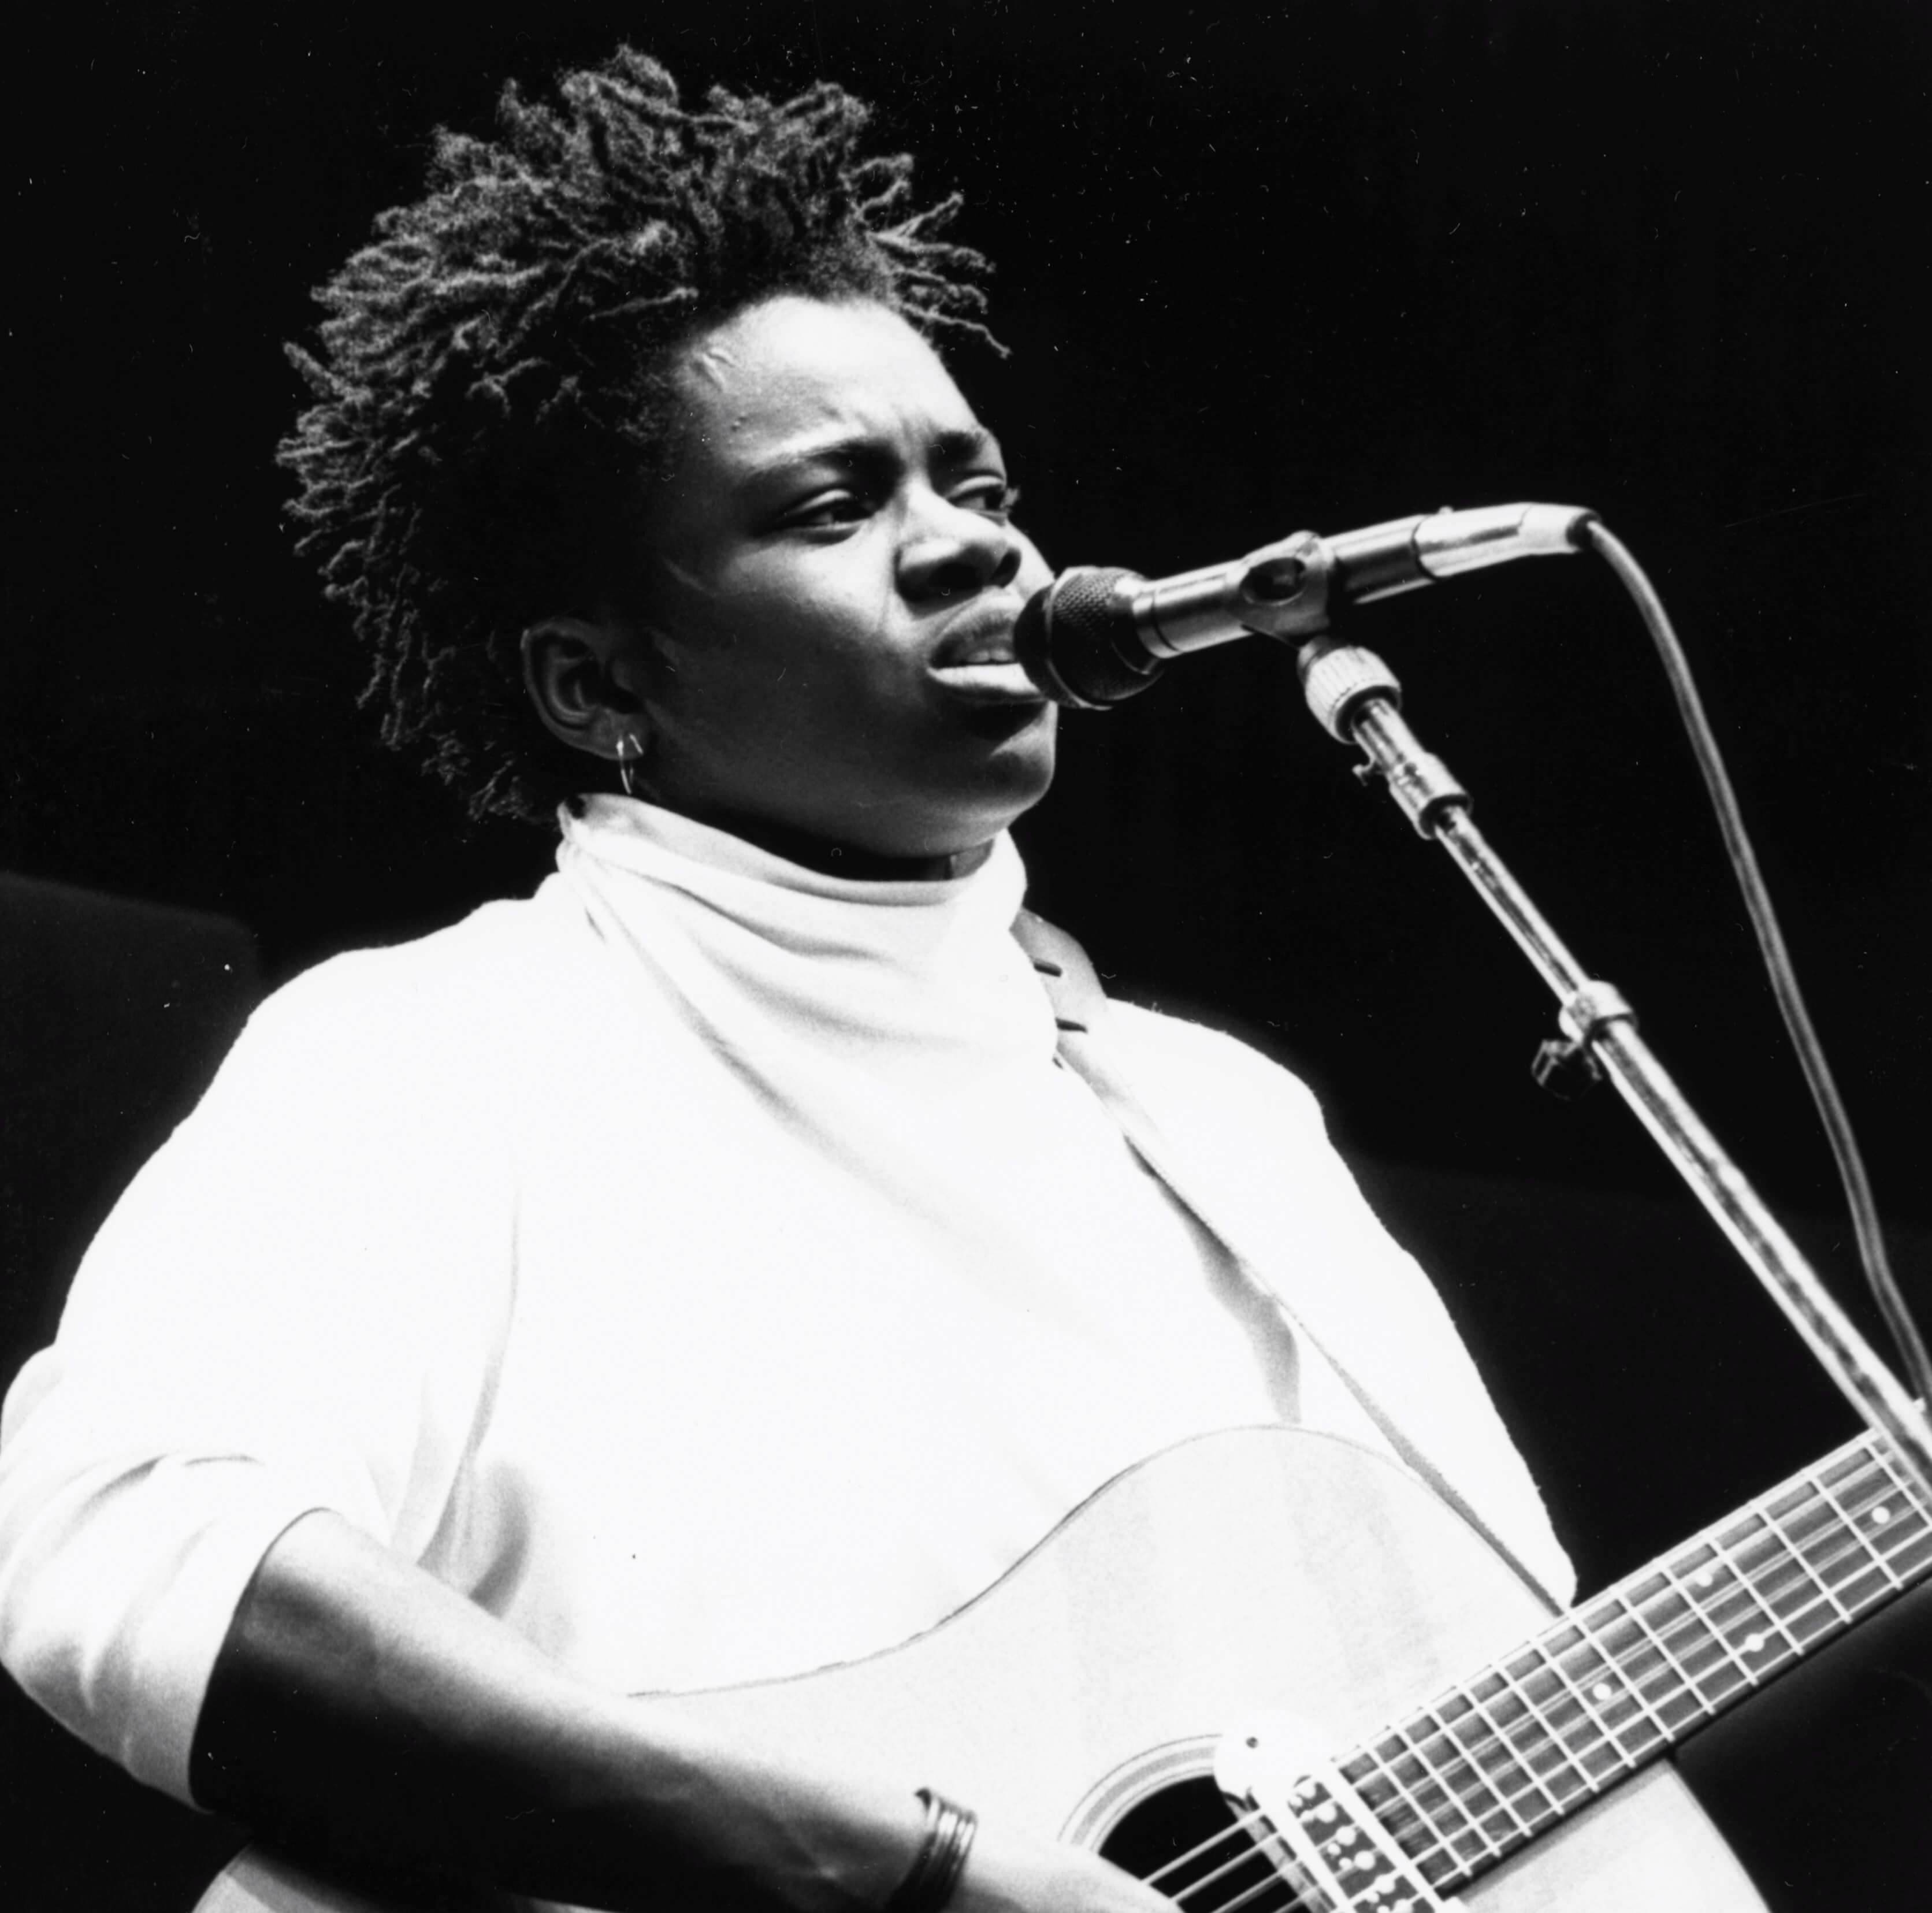 "Fast Car" singer Tracy Chapman with a microphone